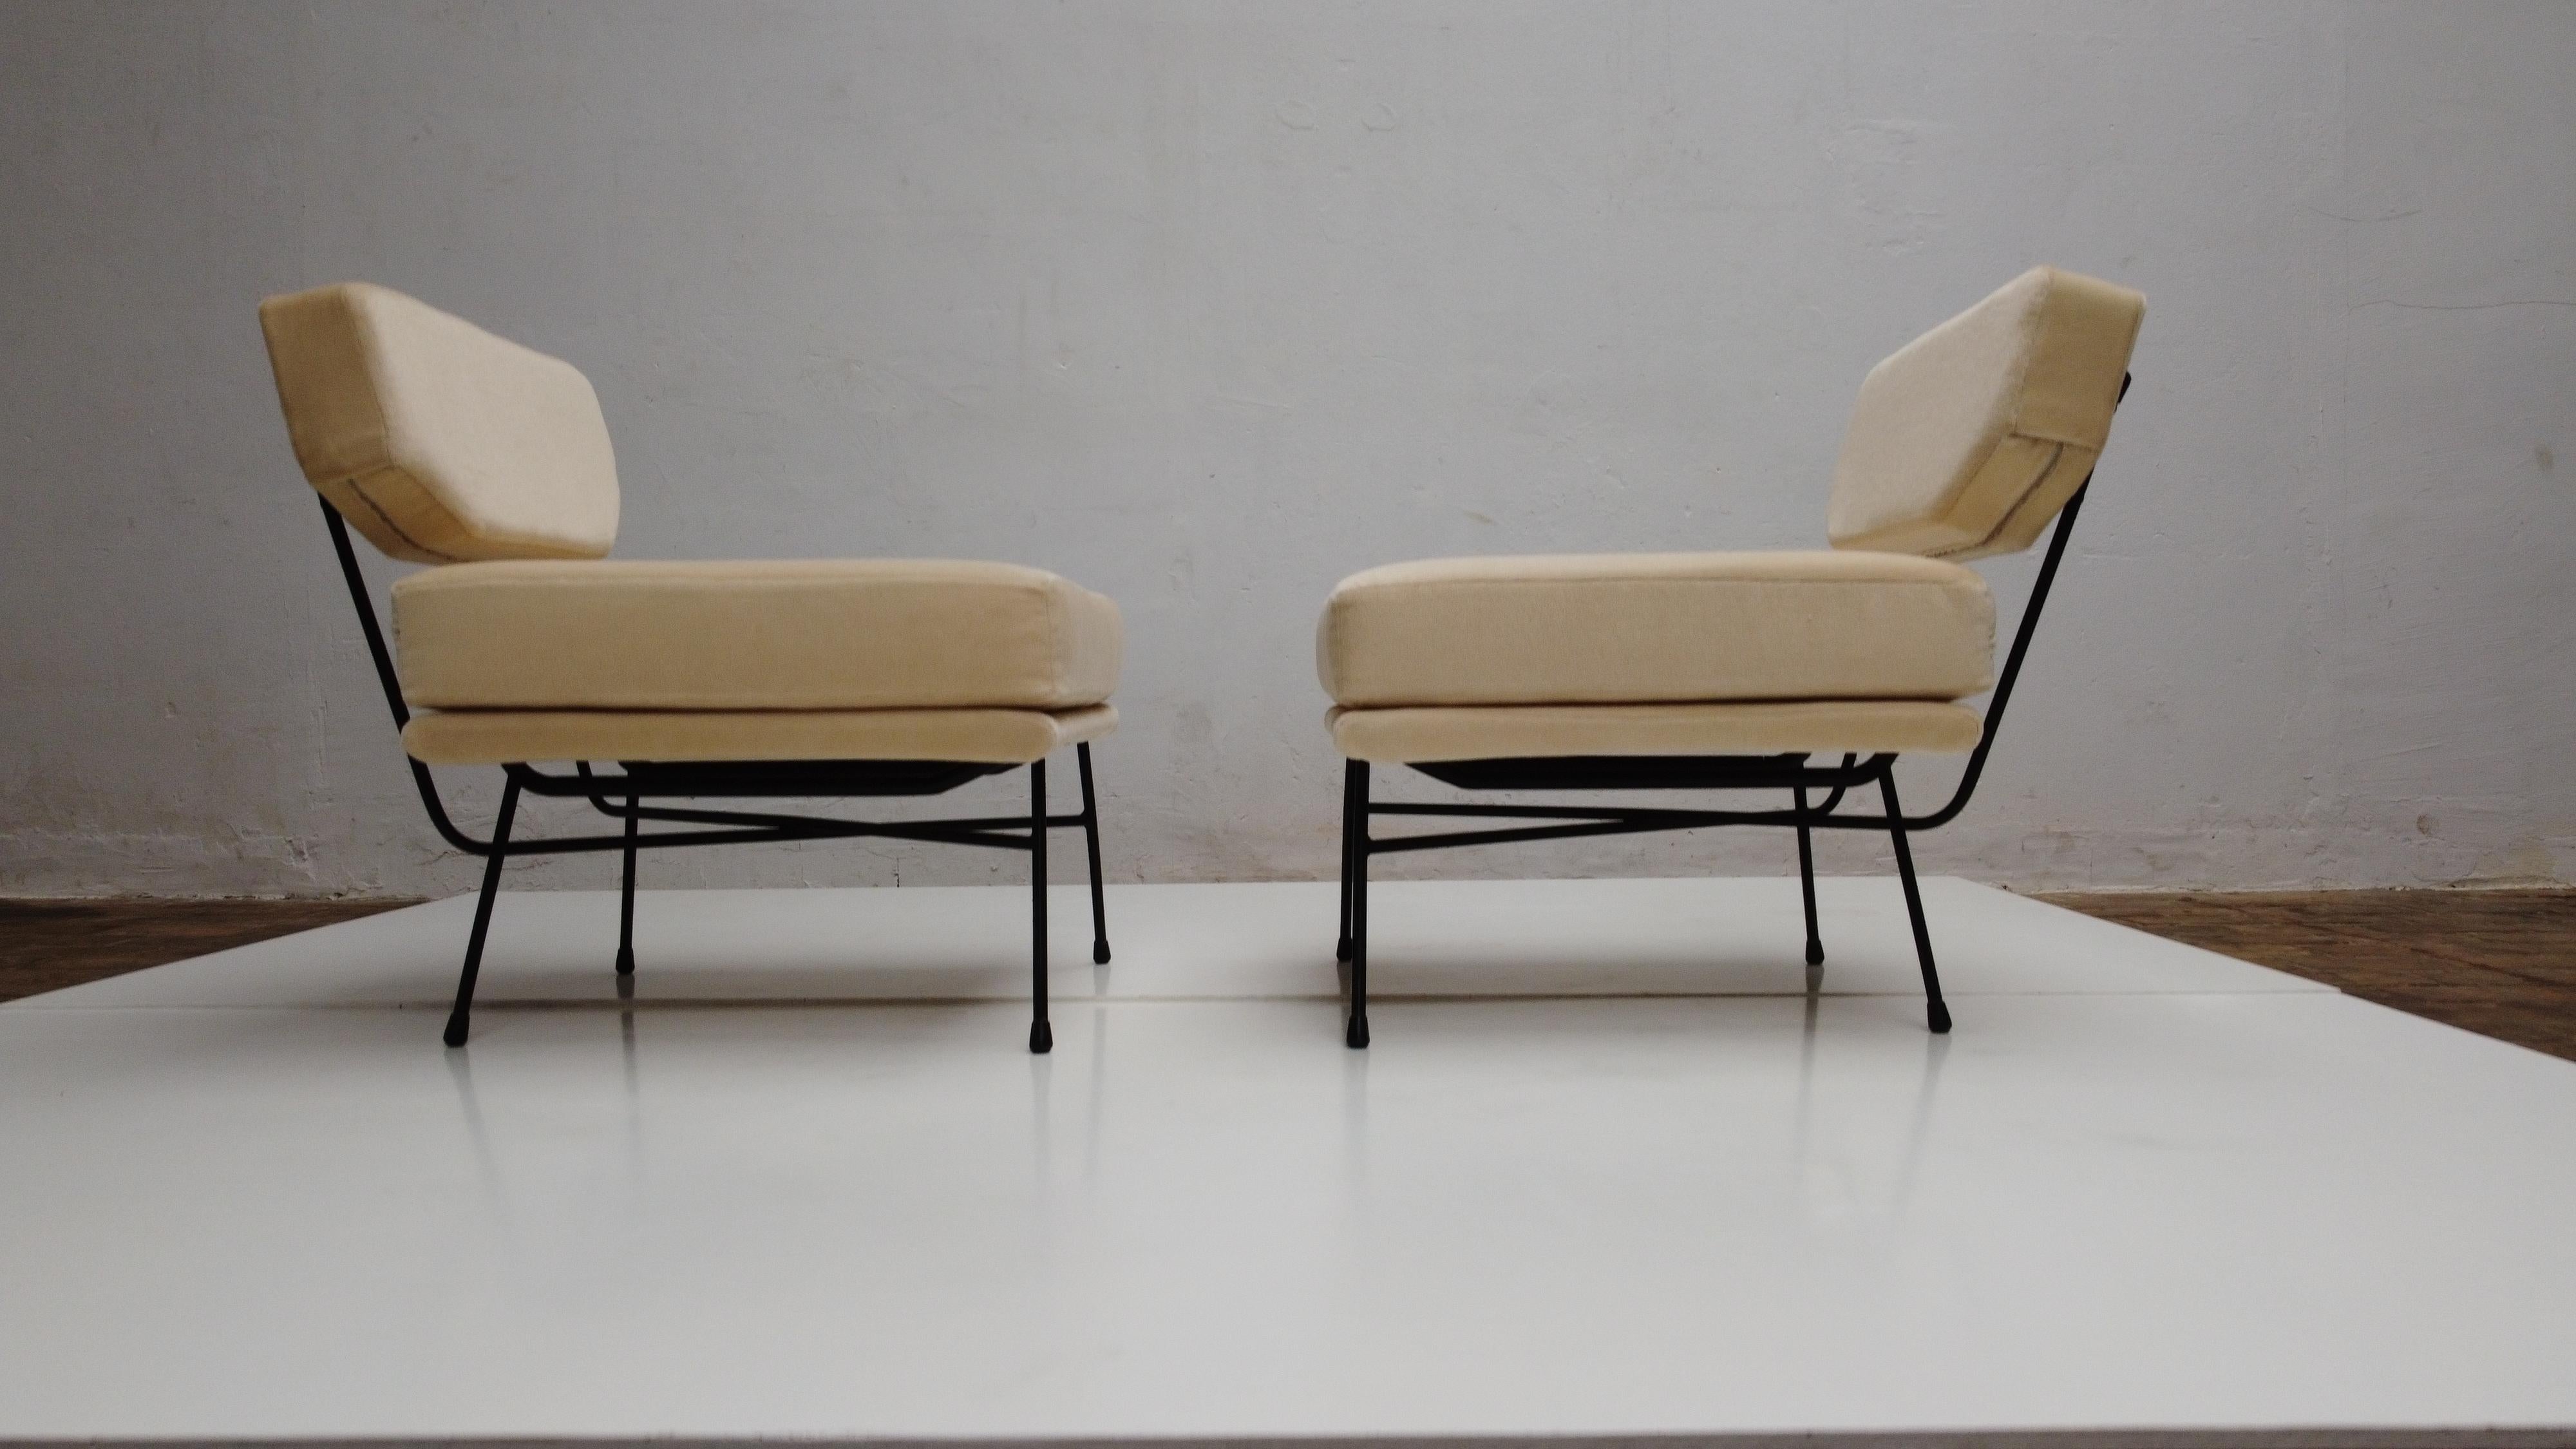 Pair of 'Elettra' Lounge Chairs by BBPR, Arflex, Italy 1953, Compasso D'Oro 1954 For Sale 4